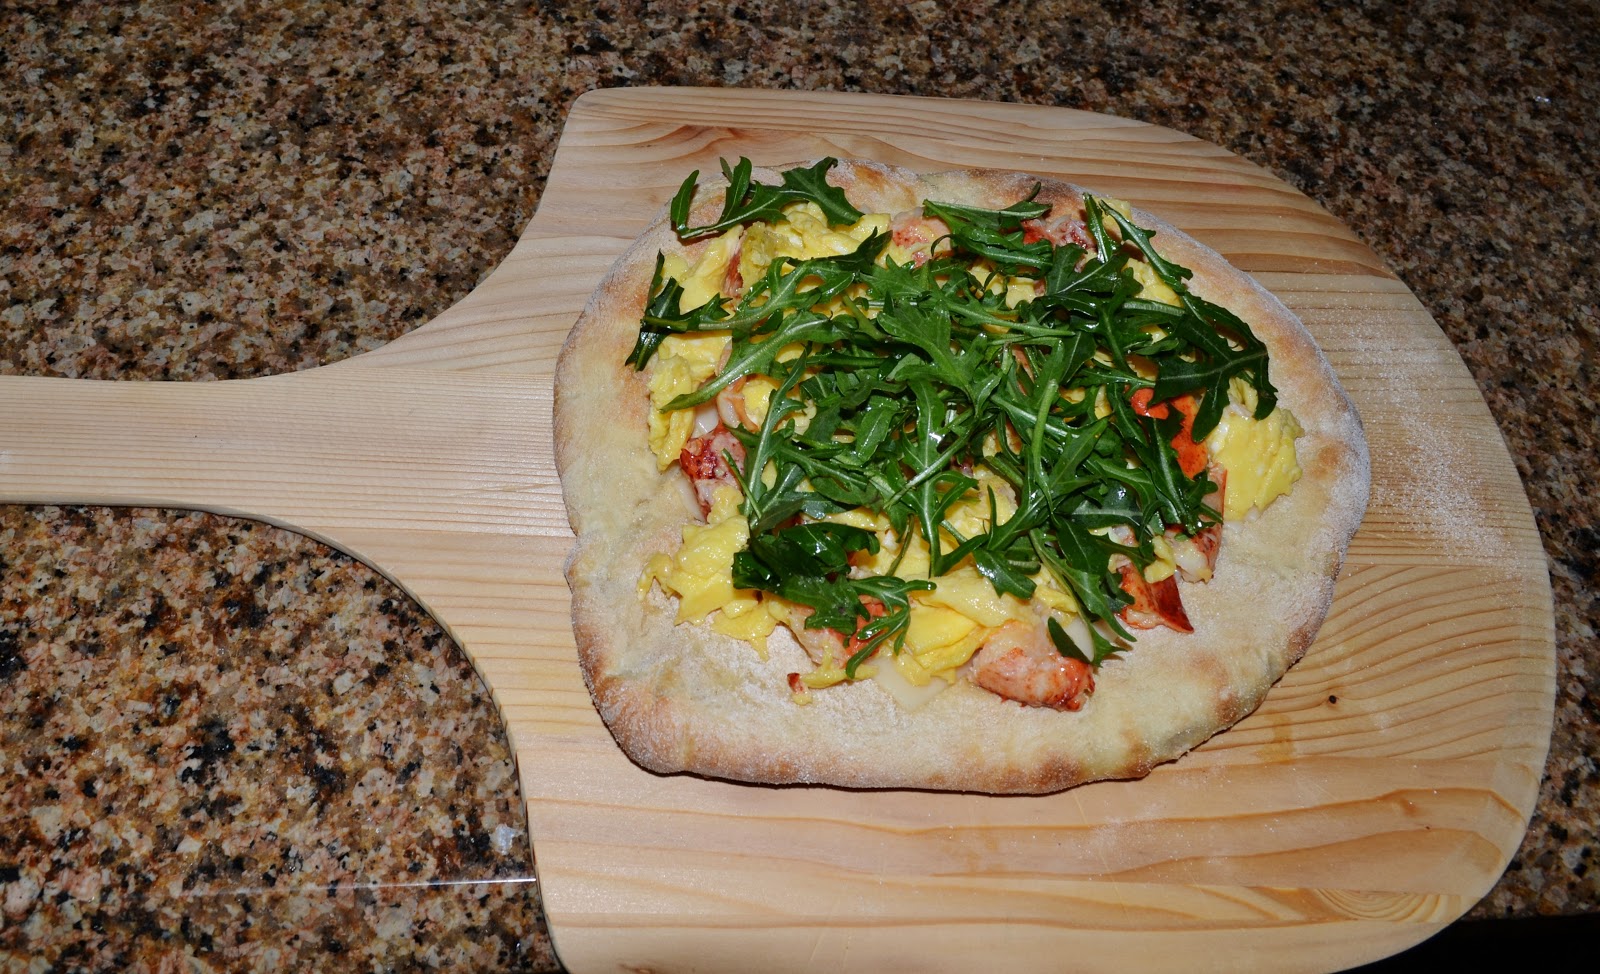 Lobster and Egg Breakfast Pizza | Yummy Eats And Travels Can I Eat Fontina Cheese While Pregnant